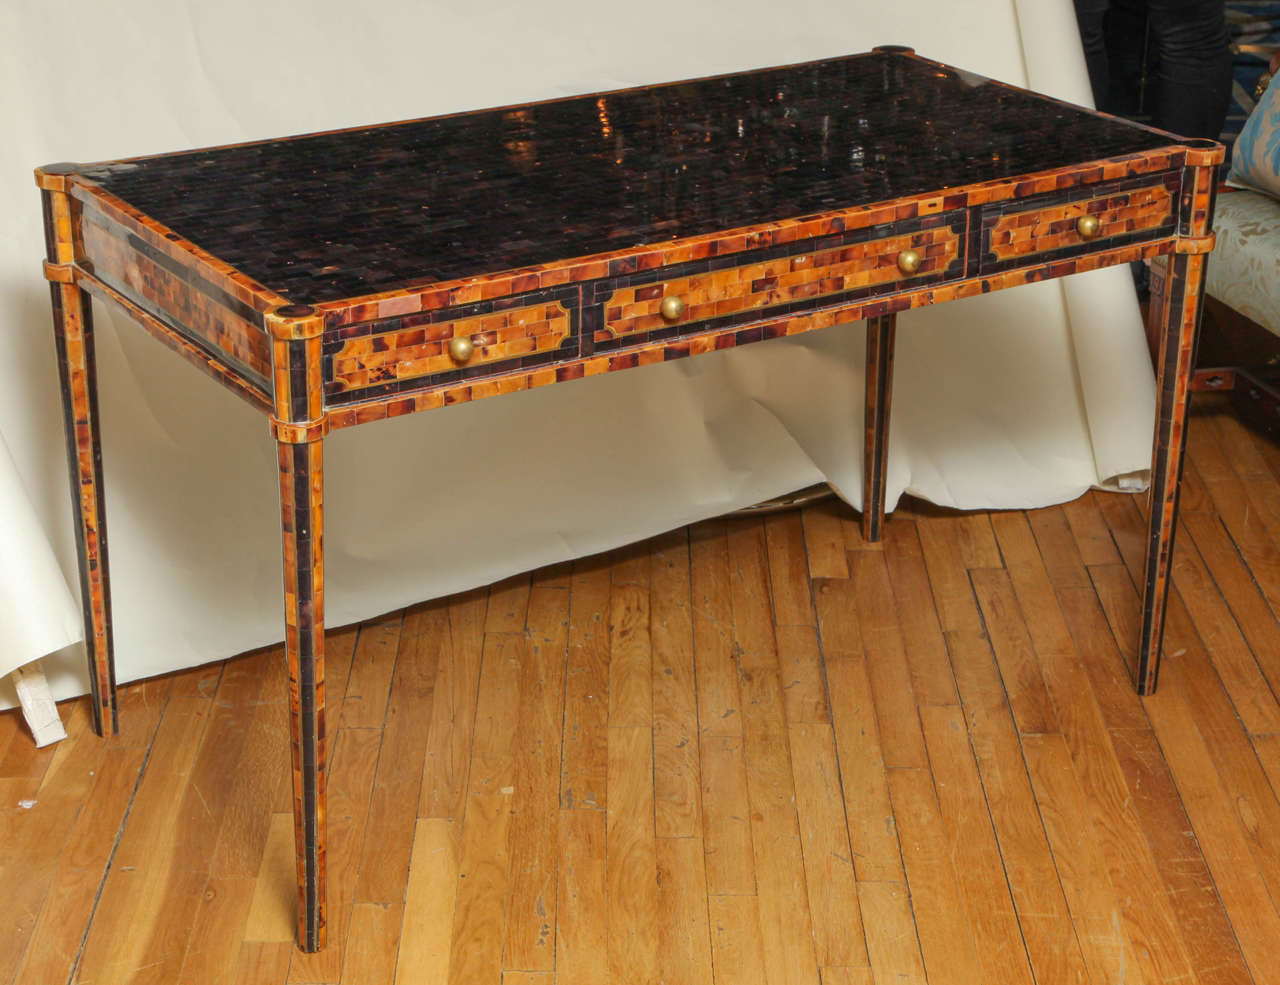 A Maitland-Smith pen shell veneered Neo-Classic design writing table with three drawers having brass pulls in apron of desk front. The drawers having patterned pen shell veneer. The top with horizontal sections of pen shell and rounded corners